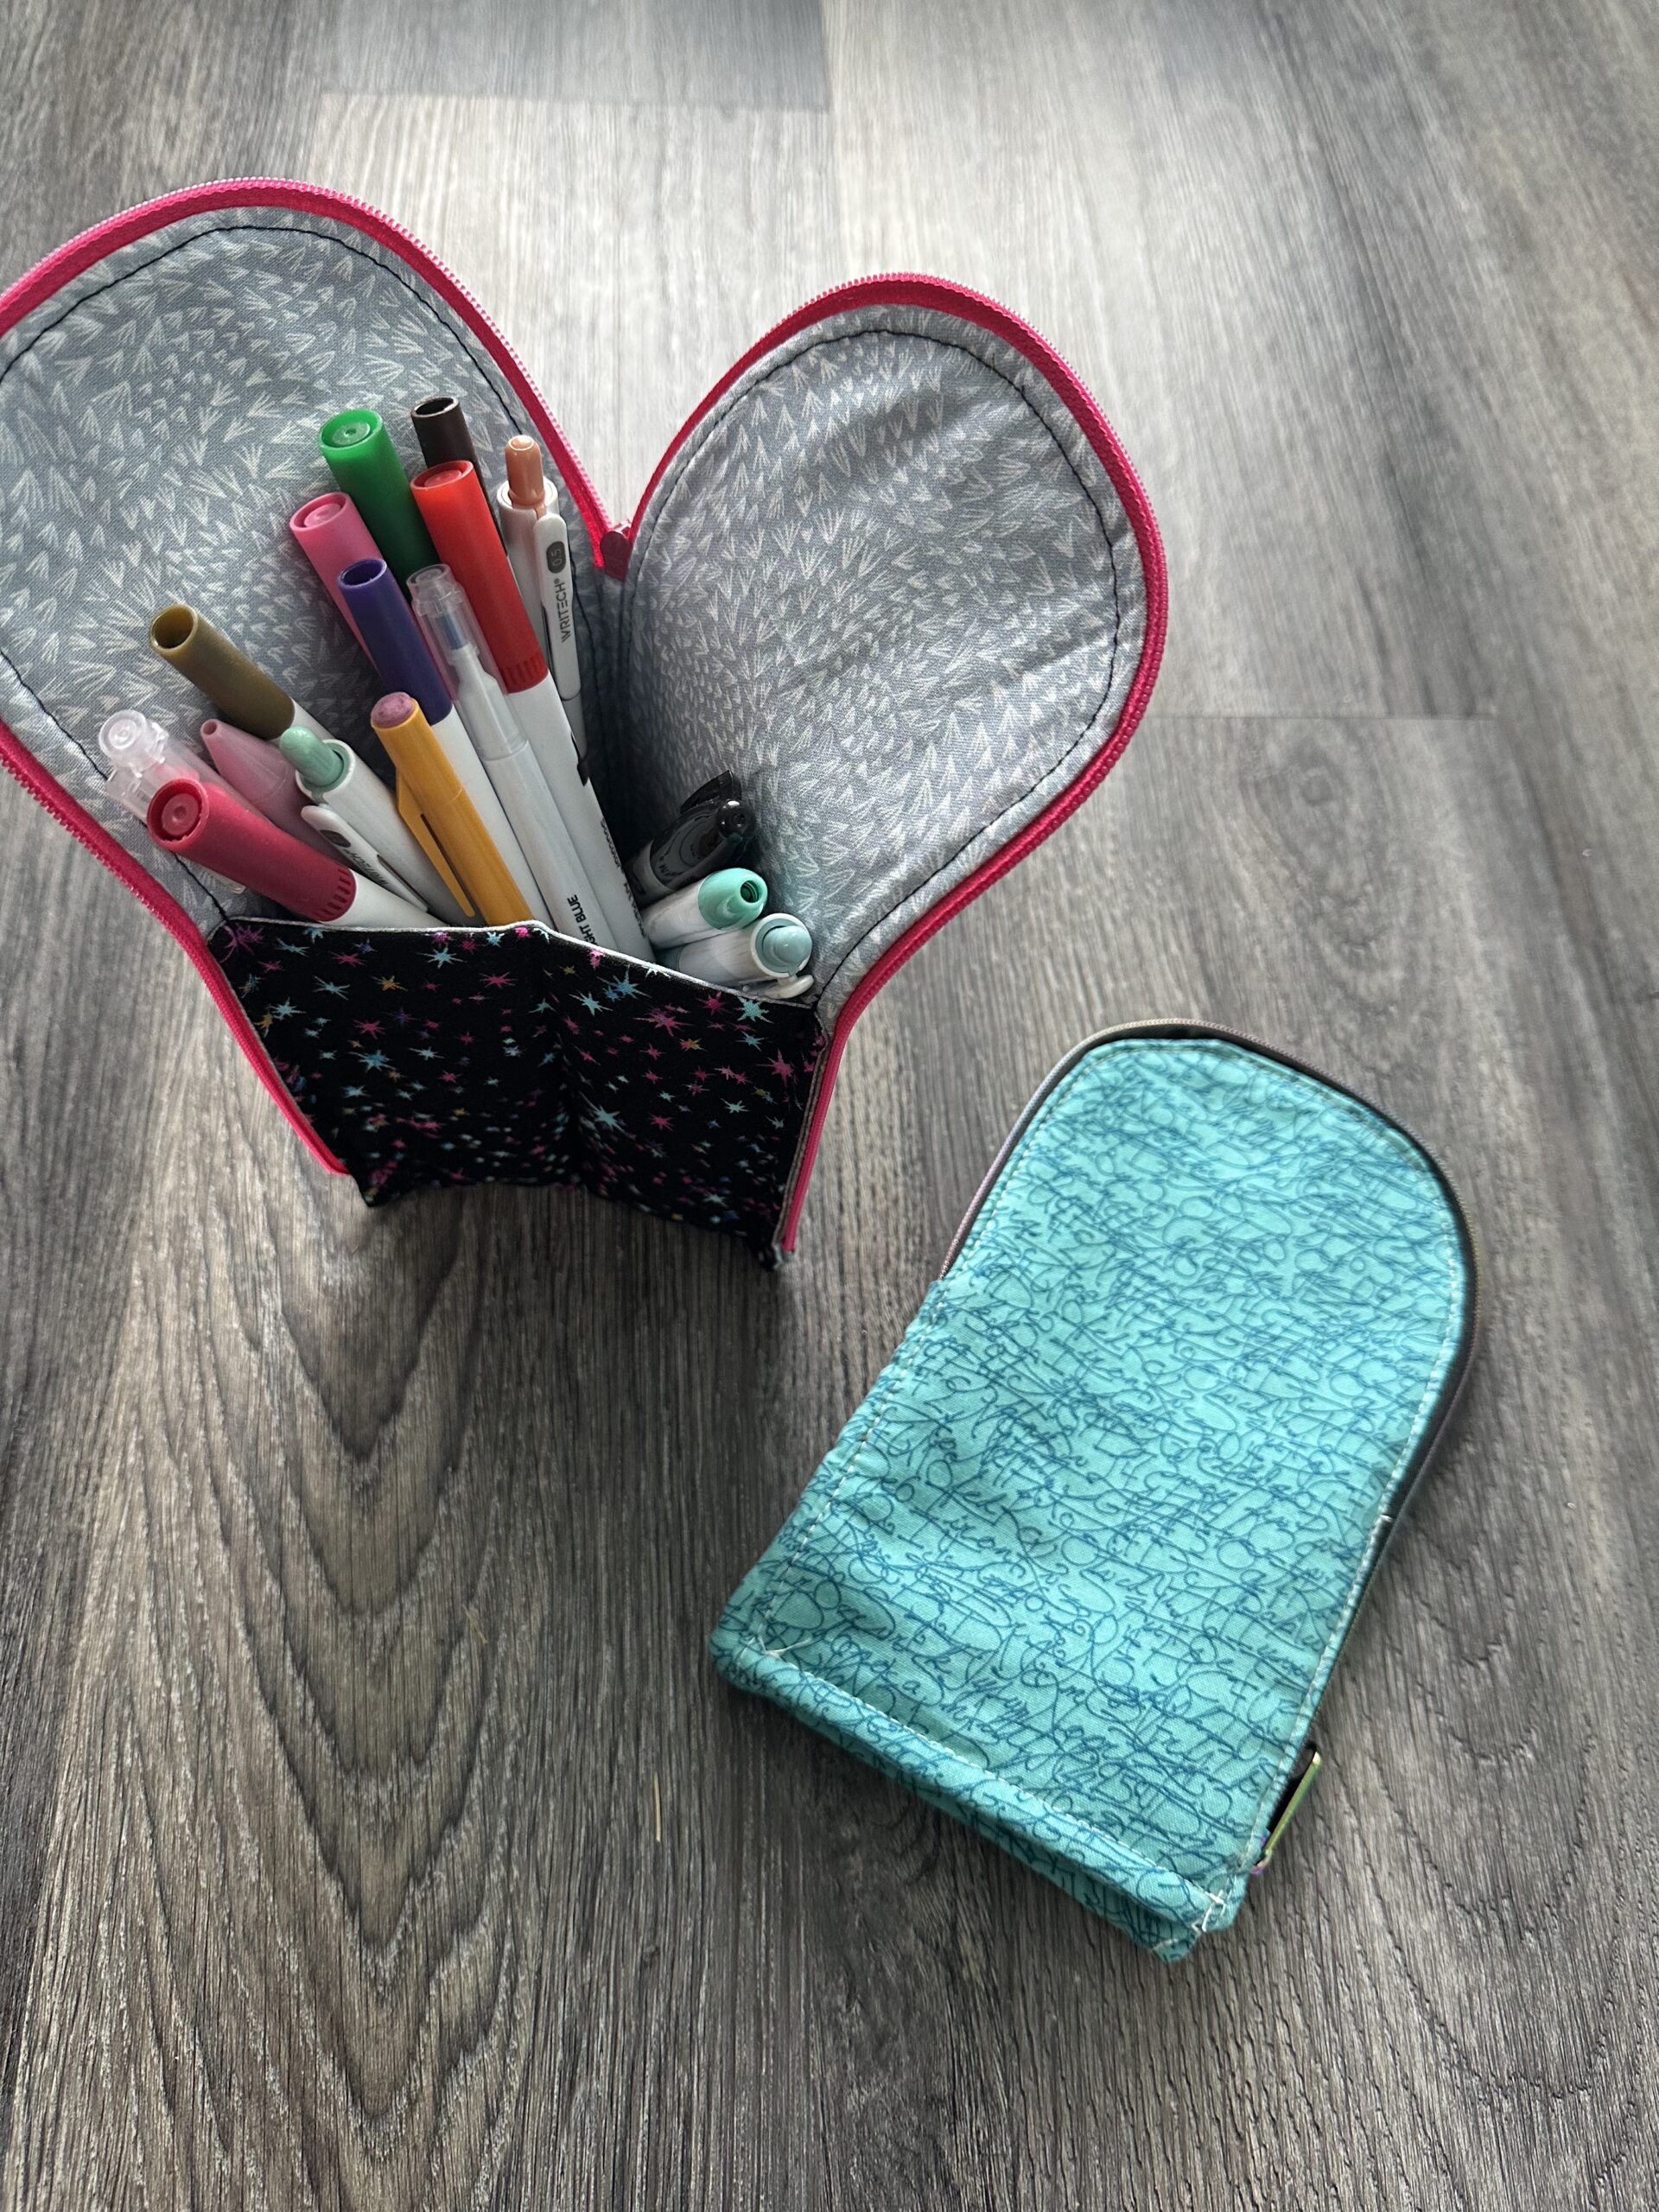 Sewing Tutorial: Standing Pencil Pouch